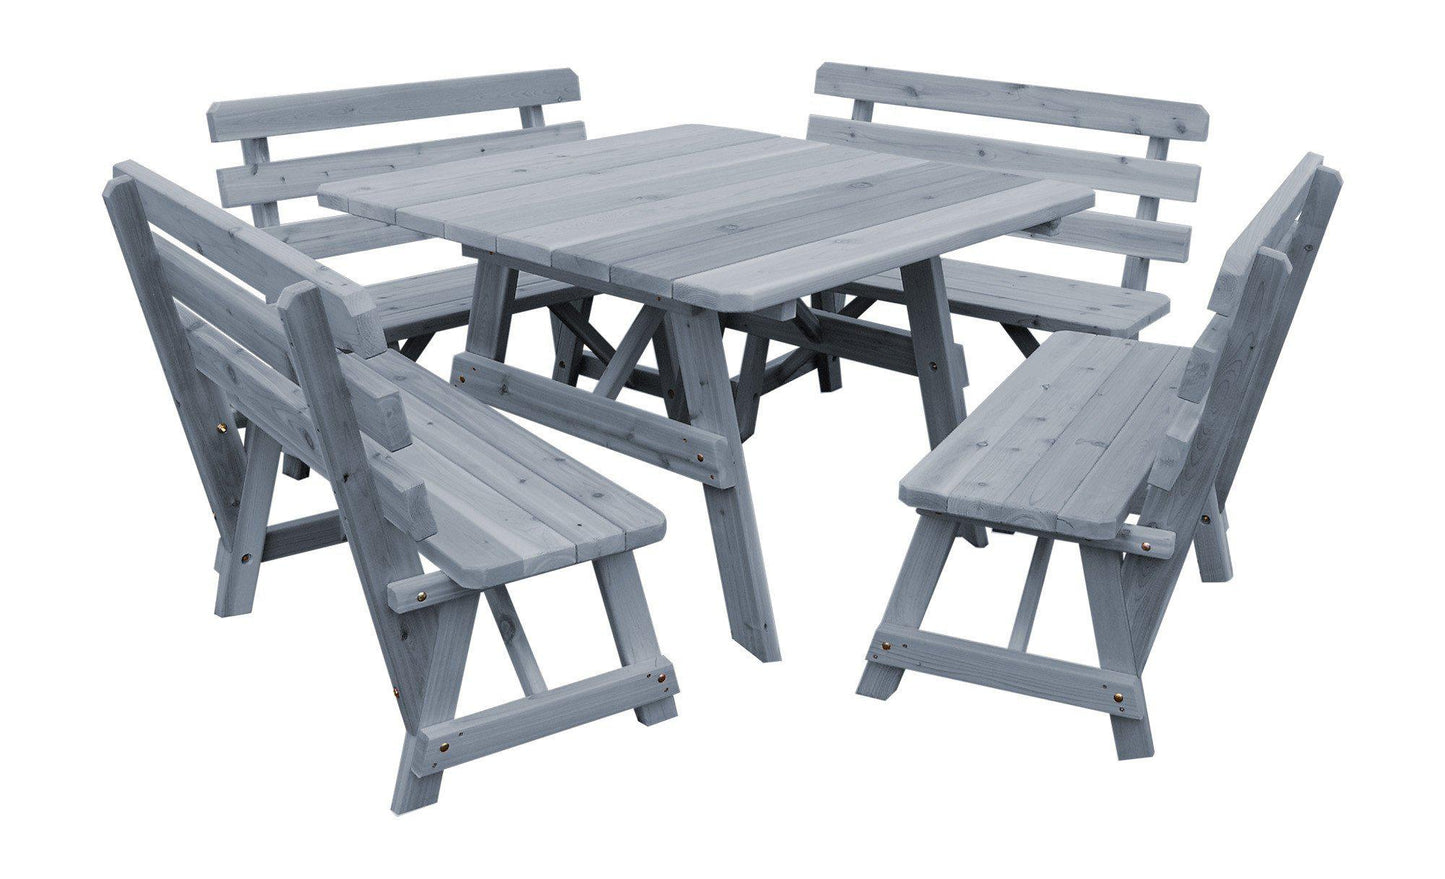 Regallion Outdoor Western Red Cedar 43" Square Table w/ 4 Backed Benches- Specify for FREE 2" Umbrella Hole - LEAD TIME TO SHIP 2 WEEKS